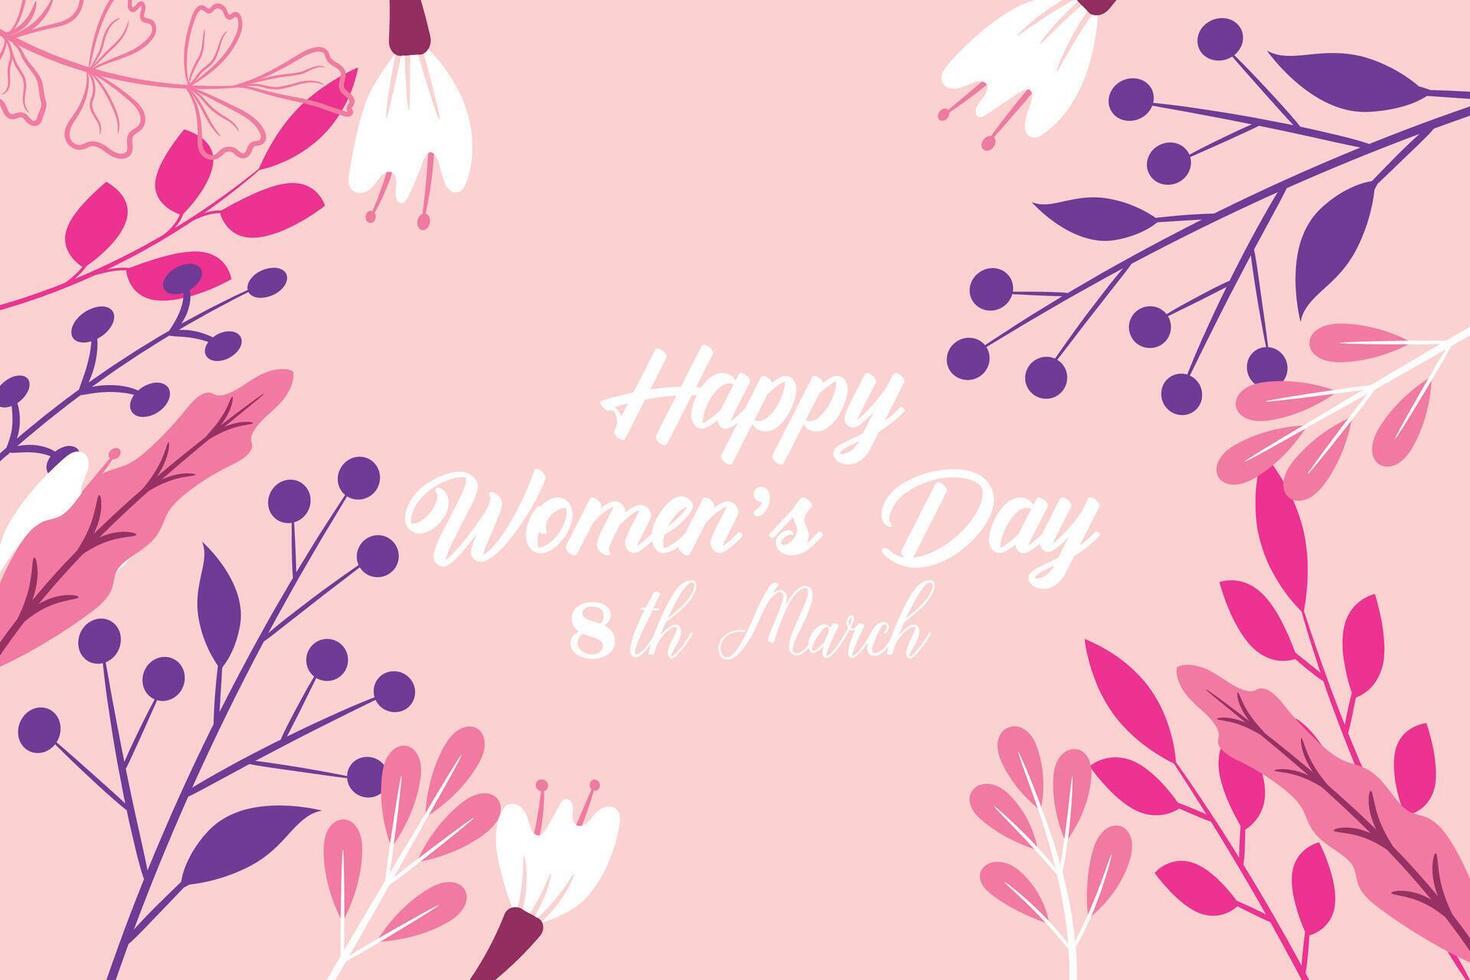 8 March, women's Day greeting card and Happy Women's Day banner design, placard, card, and poster design template with text inscription and standard color,  International Women's Day celebration, vector